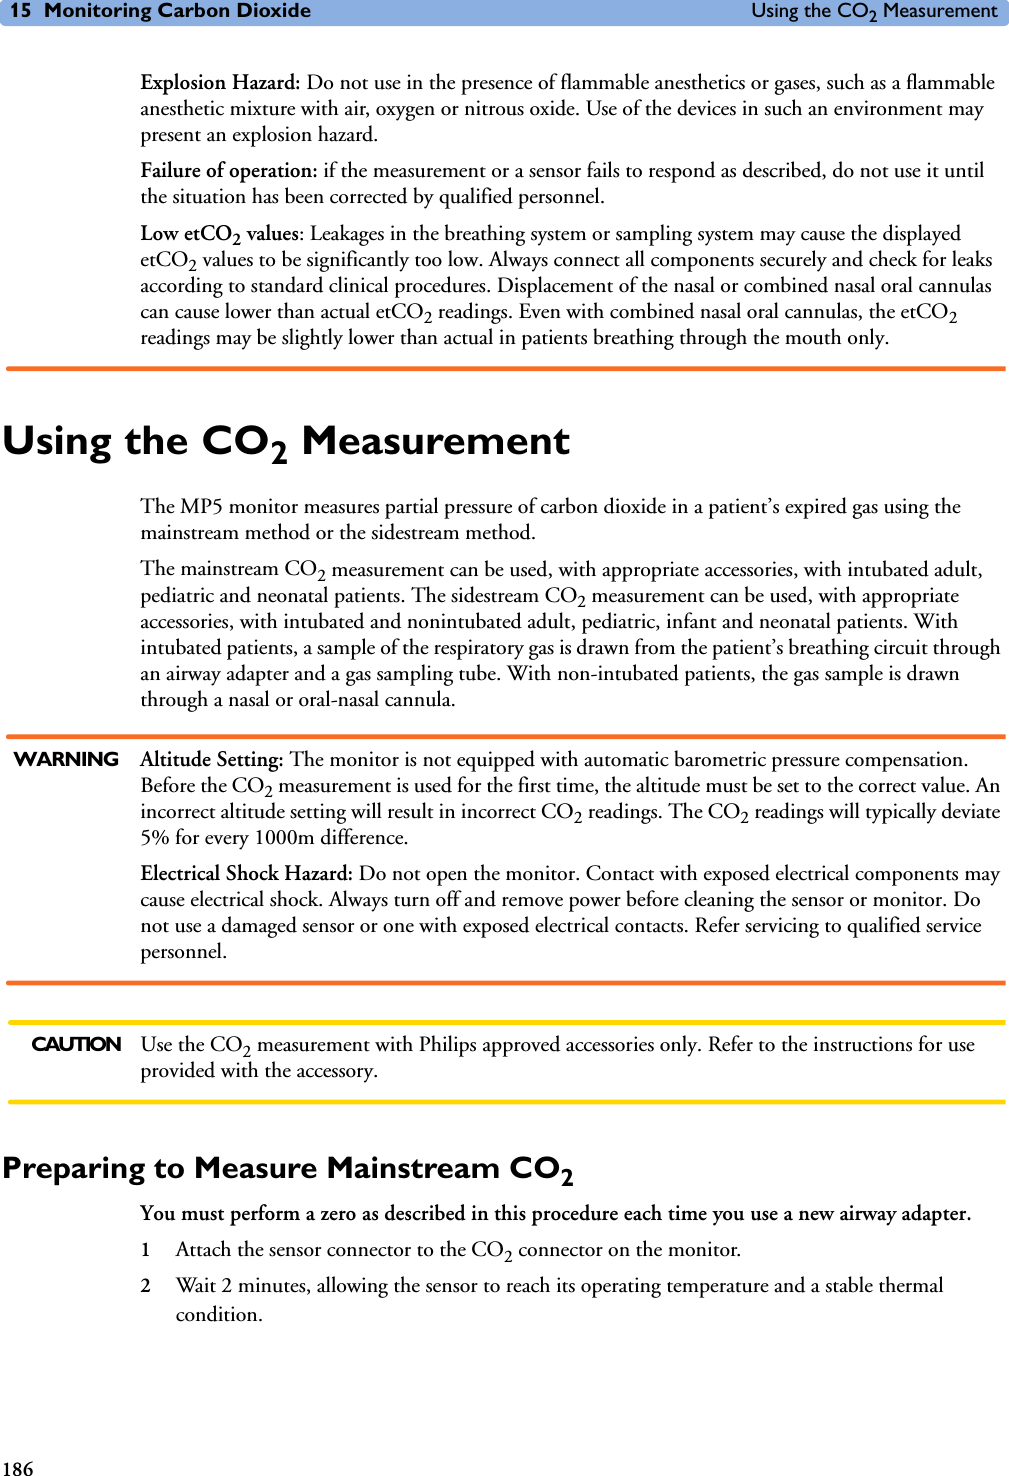 15 Monitoring Carbon Dioxide Using the CO2 Measurement186Explosion Hazard: Do not use in the presence of flammable anesthetics or gases, such as a flammable anesthetic mixture with air, oxygen or nitrous oxide. Use of the devices in such an environment may present an explosion hazard.Failure of operation: if the measurement or a sensor fails to respond as described, do not use it until the situation has been corrected by qualified personnel.Low etCO2 values: Leakages in the breathing system or sampling system may cause the displayed etCO2 values to be significantly too low. Always connect all components securely and check for leaks according to standard clinical procedures. Displacement of the nasal or combined nasal oral cannulas can cause lower than actual etCO2 readings. Even with combined nasal oral cannulas, the etCO2 readings may be slightly lower than actual in patients breathing through the mouth only.Using the CO2 MeasurementThe MP5 monitor measures partial pressure of carbon dioxide in a patient’s expired gas using the mainstream method or the sidestream method.The mainstream CO2 measurement can be used, with appropriate accessories, with intubated adult, pediatric and neonatal patients. The sidestream CO2 measurement can be used, with appropriate accessories, with intubated and nonintubated adult, pediatric, infant and neonatal patients. With intubated patients, a sample of the respiratory gas is drawn from the patient’s breathing circuit through an airway adapter and a gas sampling tube. With non-intubated patients, the gas sample is drawn through a nasal or oral-nasal cannula.WARNING Altitude Setting: The monitor is not equipped with automatic barometric pressure compensation. Before the CO2 measurement is used for the first time, the altitude must be set to the correct value. An incorrect altitude setting will result in incorrect CO2 readings. The CO2 readings will typically deviate 5% for every 1000m difference.Electrical Shock Hazard: Do not open the monitor. Contact with exposed electrical components may cause electrical shock. Always turn off and remove power before cleaning the sensor or monitor. Do not use a damaged sensor or one with exposed electrical contacts. Refer servicing to qualified service personnel.CAUTION Use the CO2 measurement with Philips approved accessories only. Refer to the instructions for use provided with the accessory.Preparing to Measure Mainstream CO2You must perform a zero as described in this procedure each time you use a new airway adapter.1Attach the sensor connector to the CO2 connector on the monitor. 2Wait 2 minutes, allowing the sensor to reach its operating temperature and a stable thermal condition.